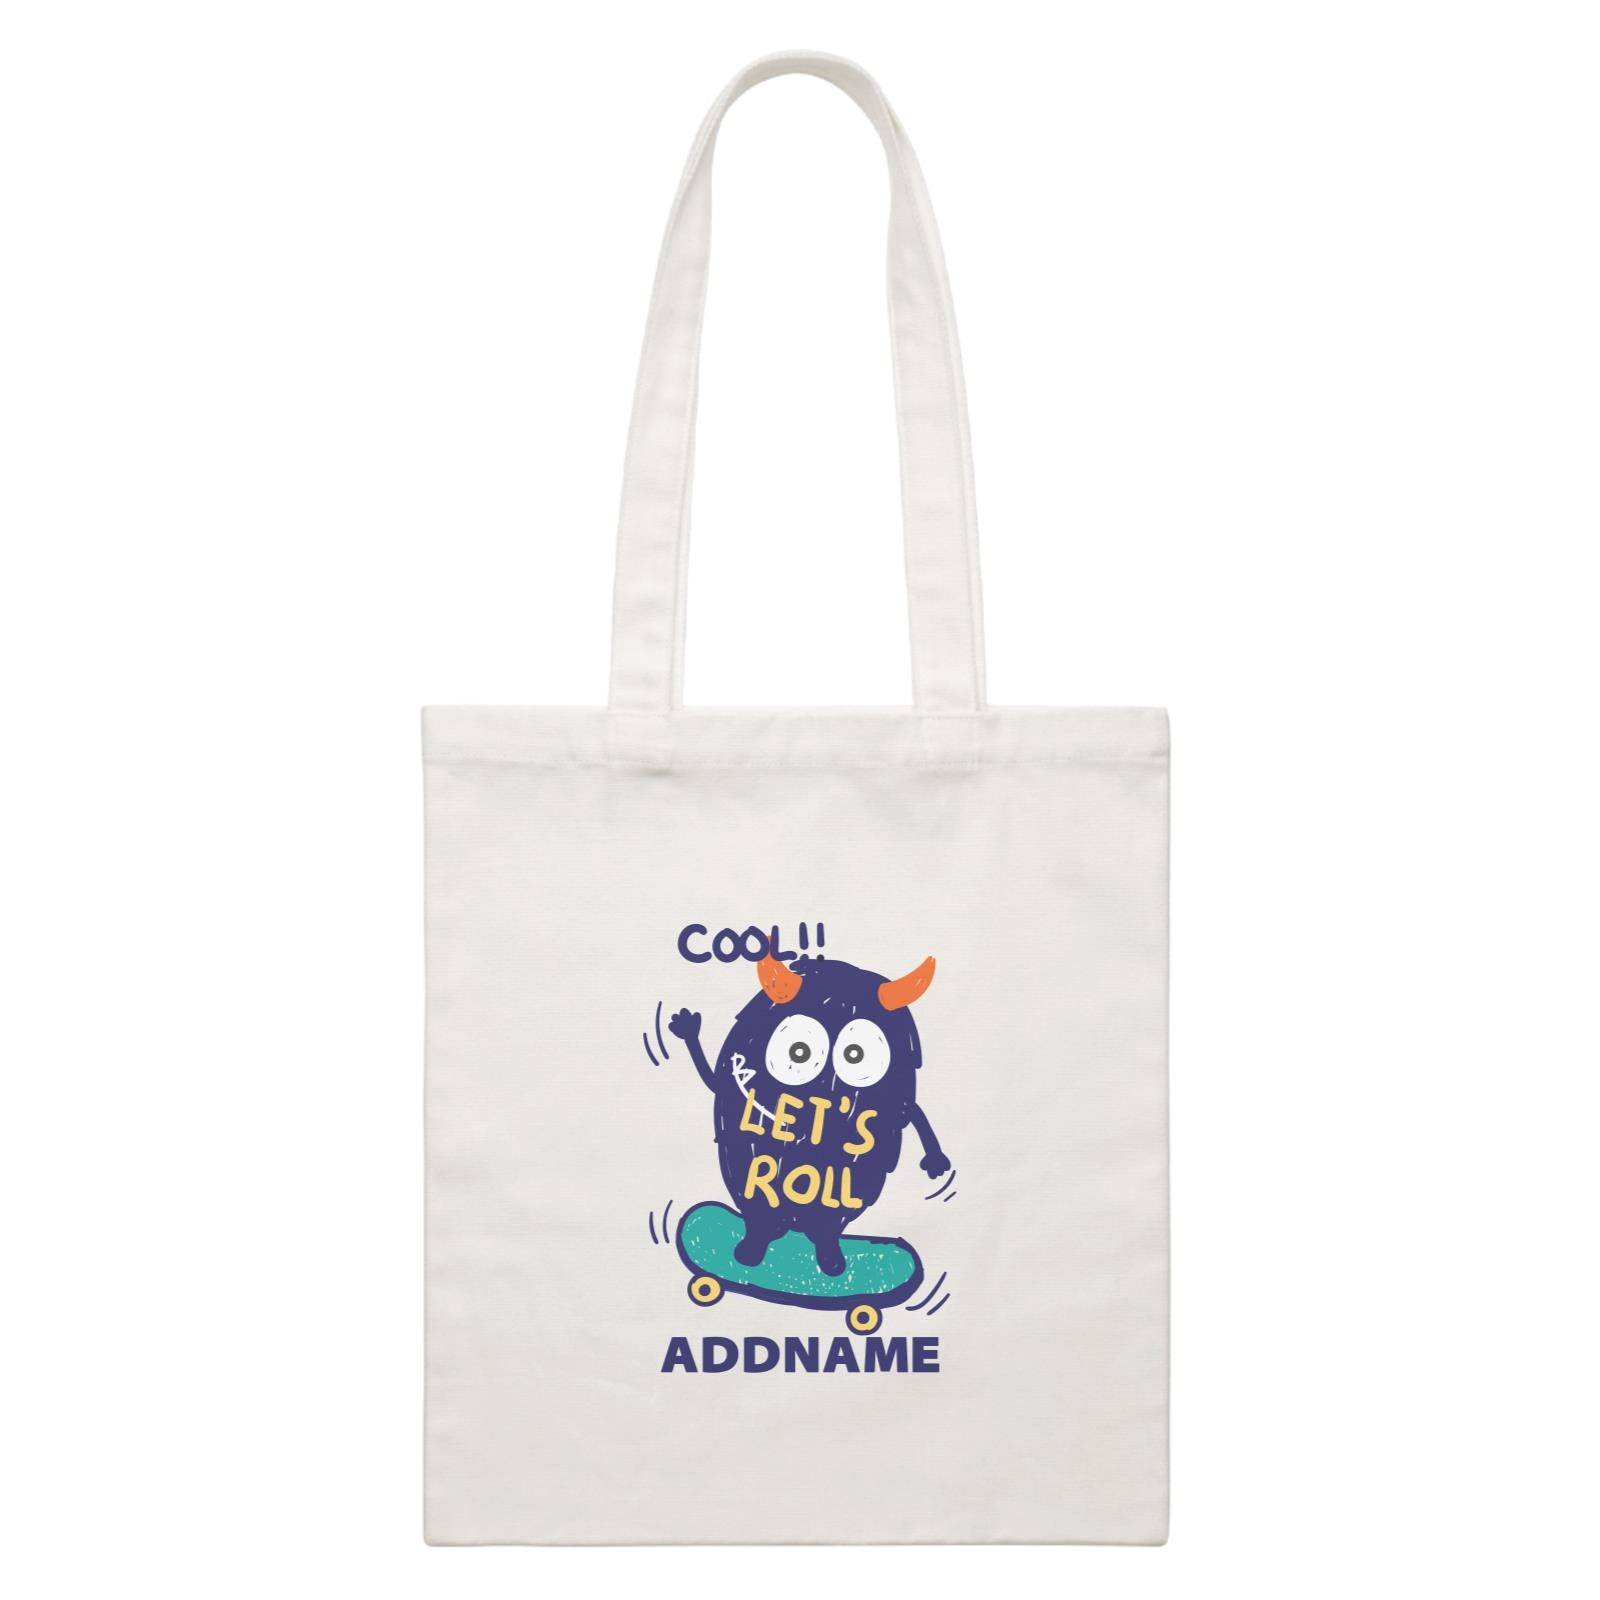 Cool Cute Monster Cool Let's Roll Monster Addname White Canvas Bag